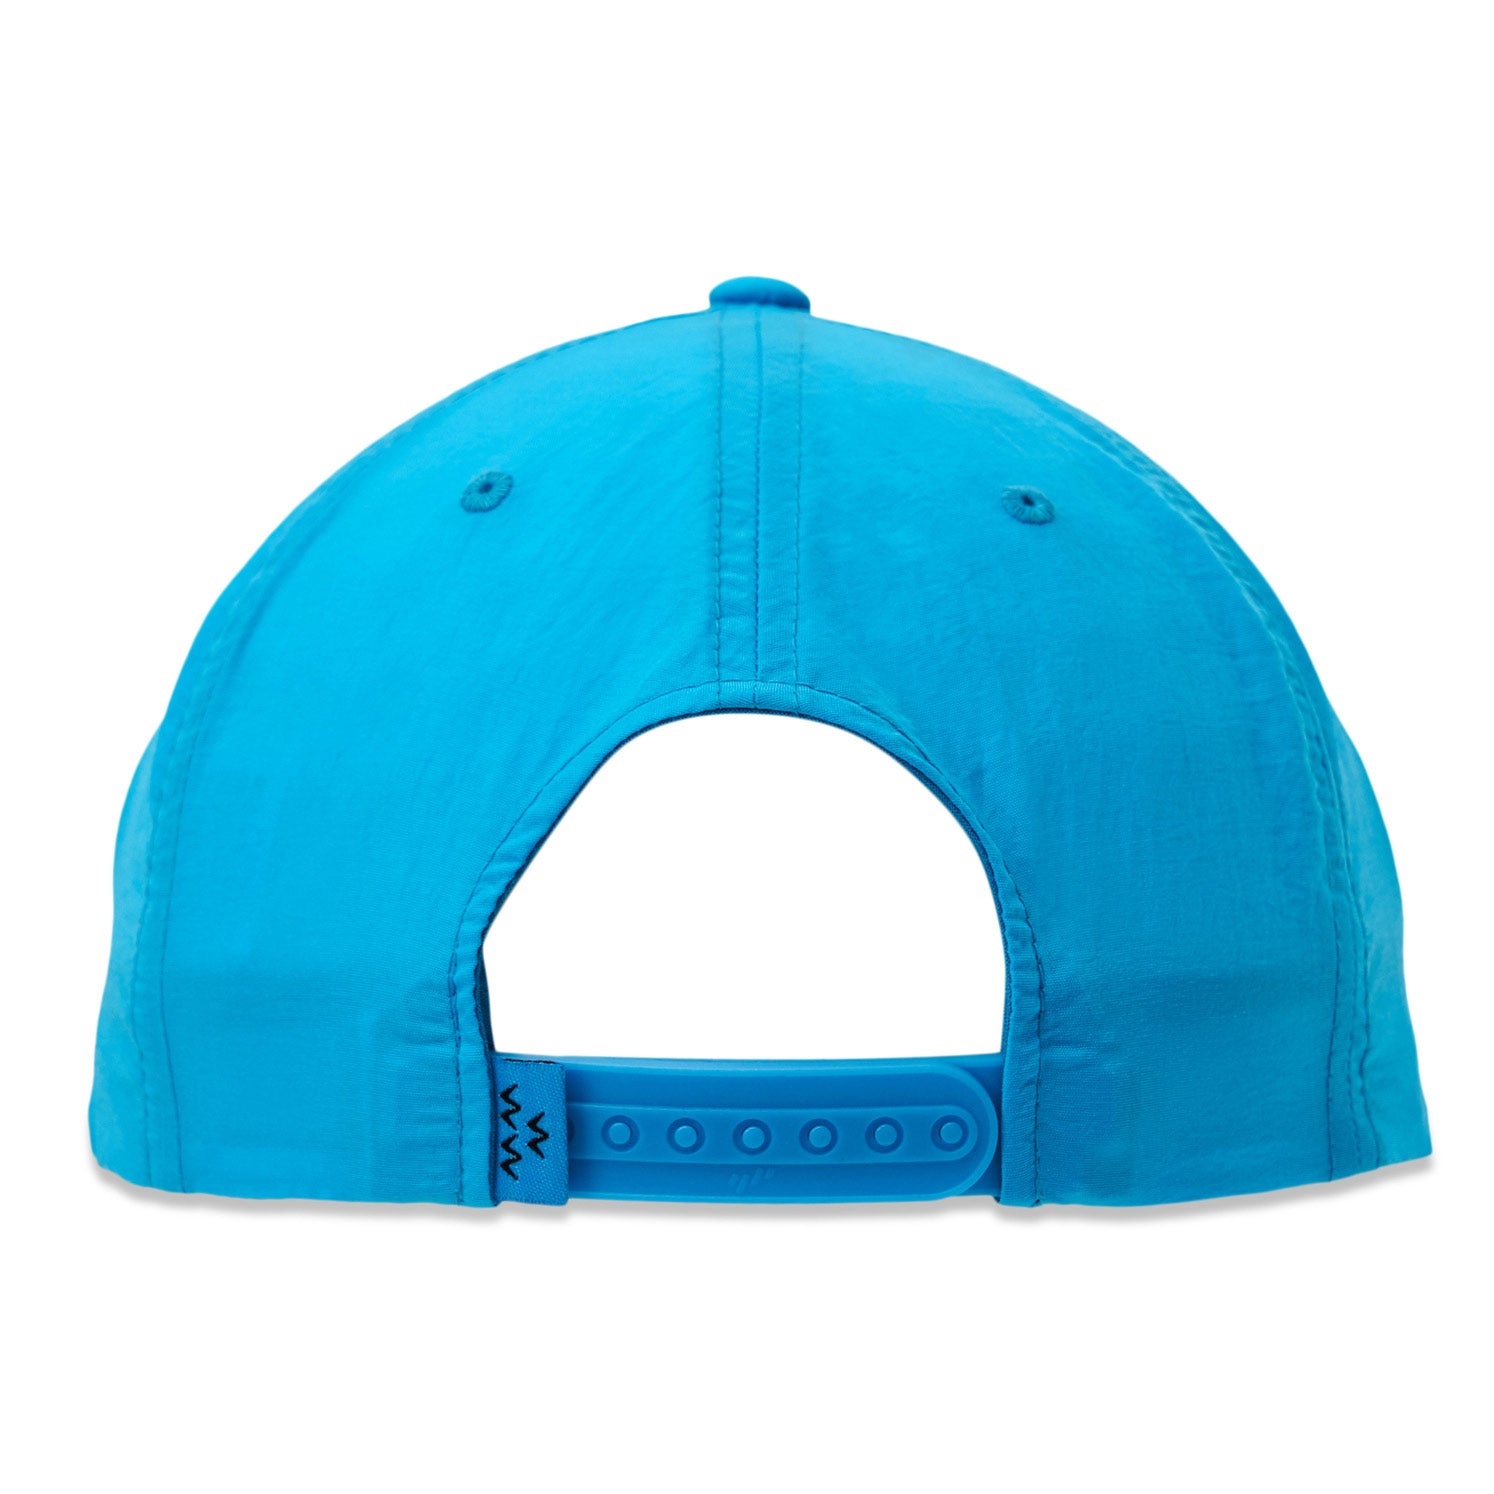 Back View of Electric Blue Nylon Snapback Cap with Osaka Theme and Slight Curved Brim - One Size Fits All